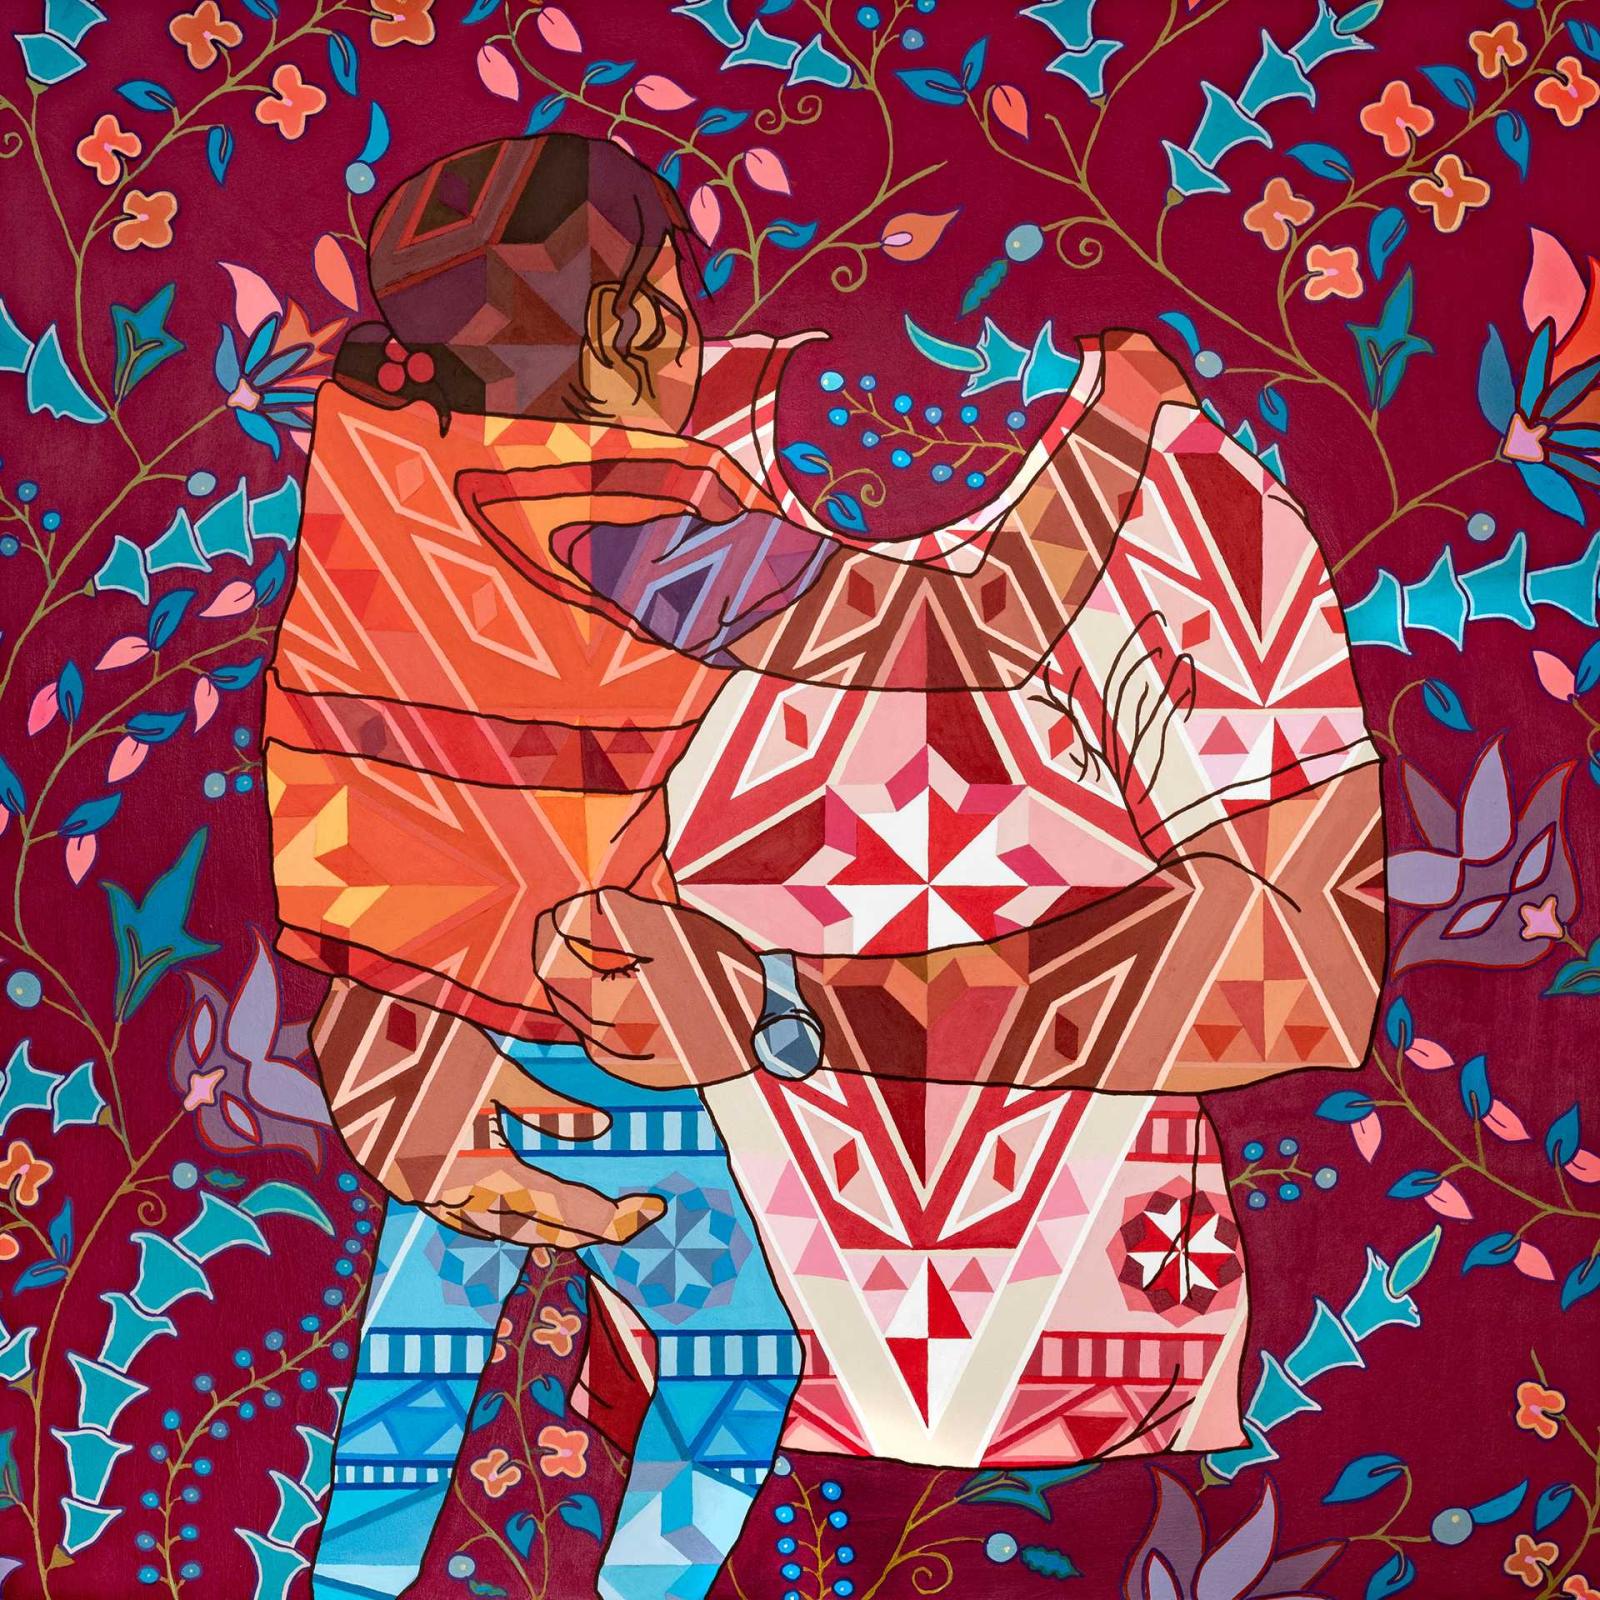 Image of a man holding a child overlaid by organic, Middle Eastern style patterns